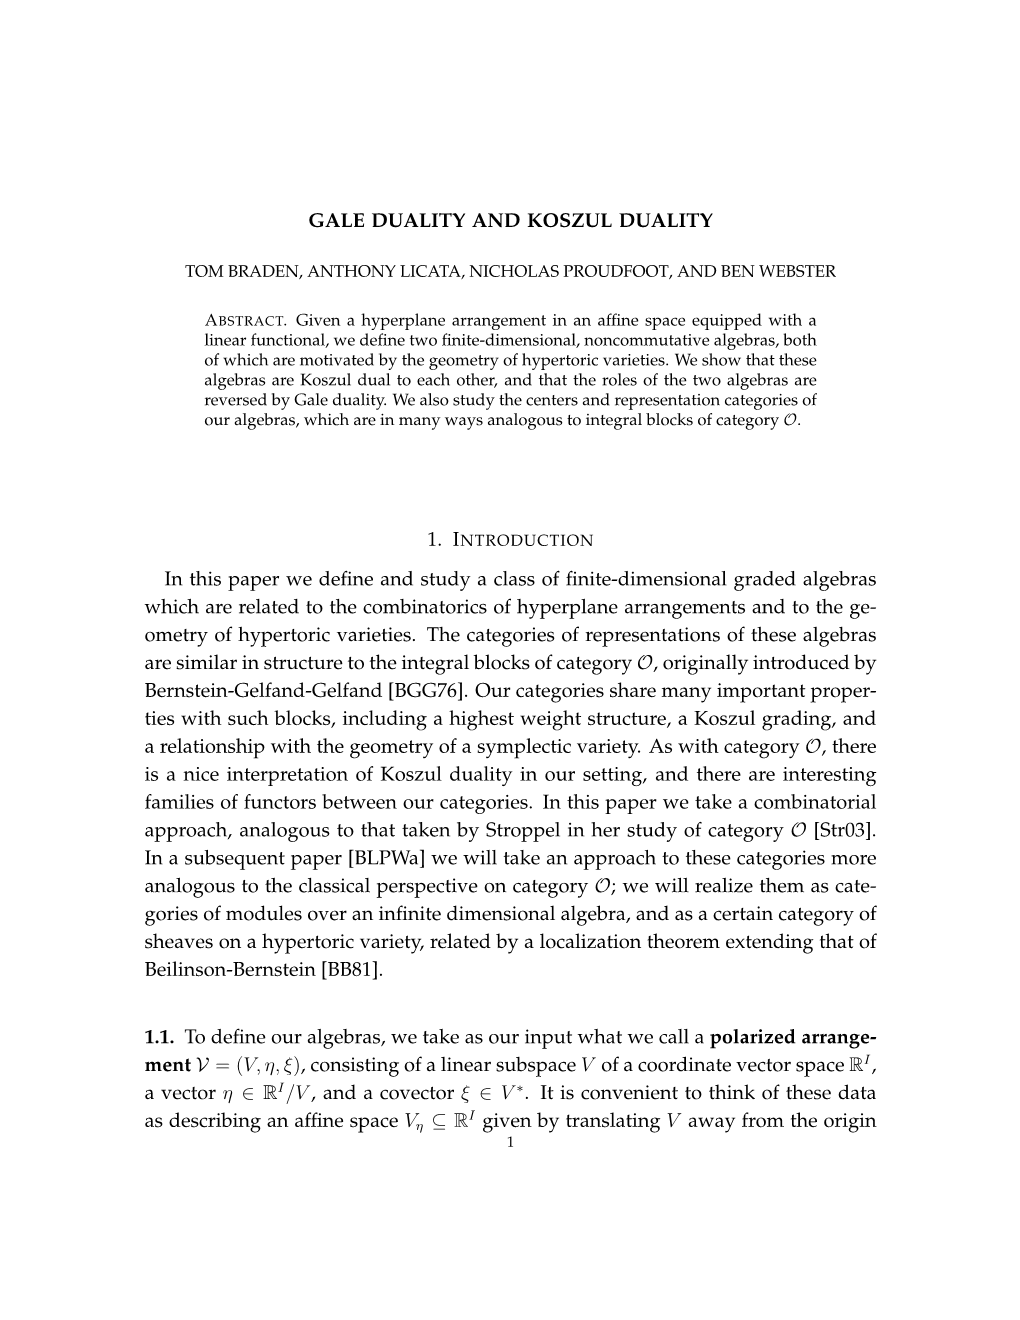 GALE DUALITY and KOSZUL DUALITY in This Paper We Define